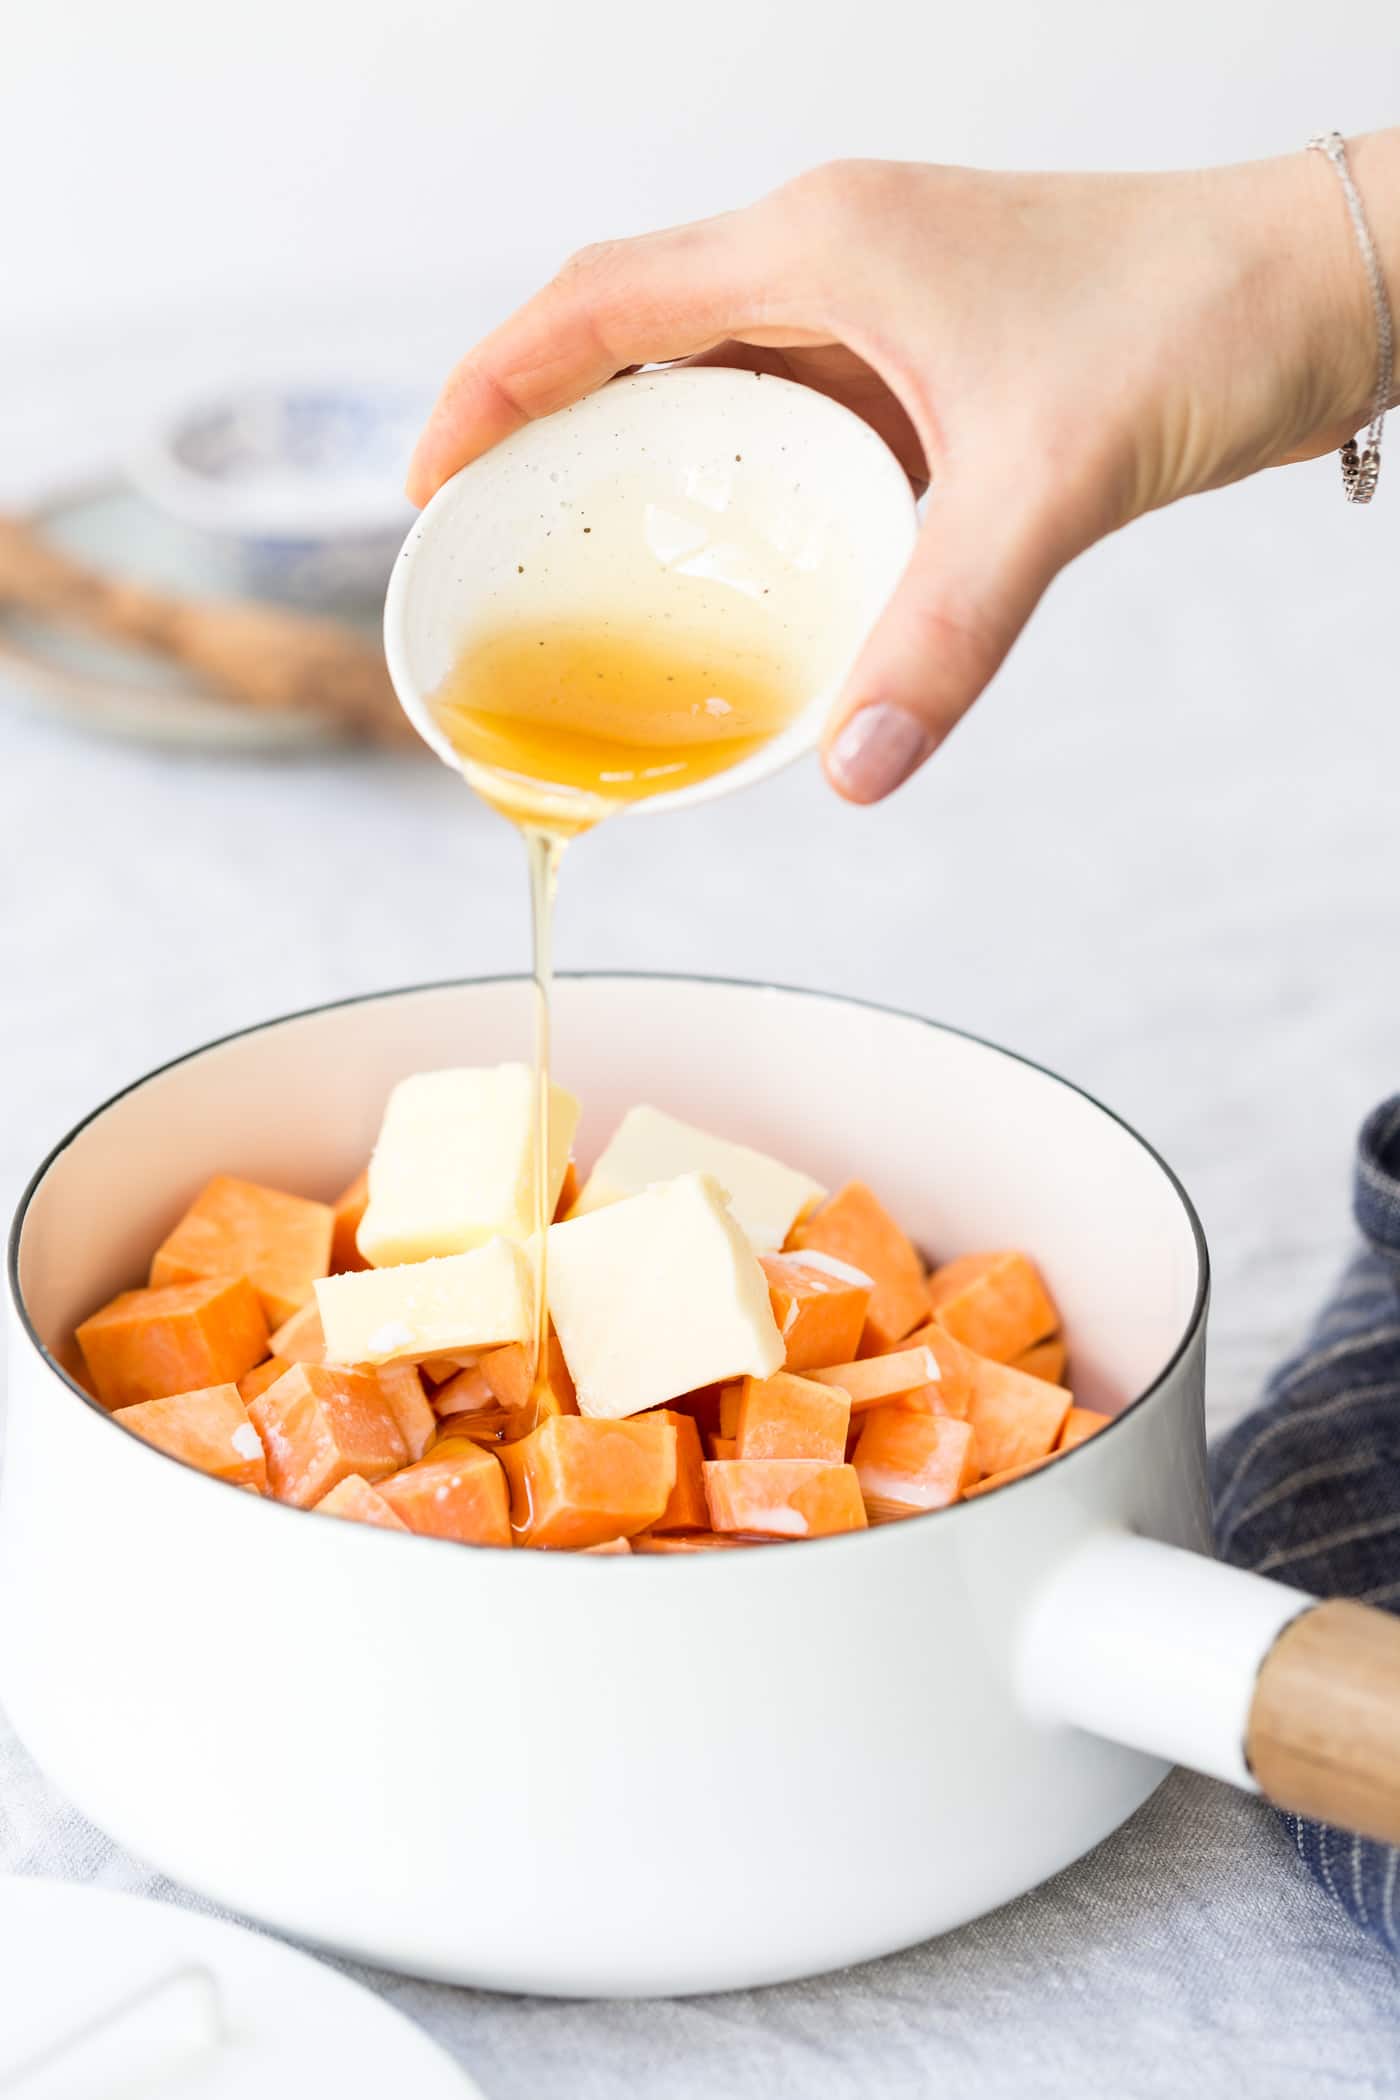 Learn how to make mashed sweet potato recipe - A woman is pouring maple syrup into butter and sweet potato mixture.